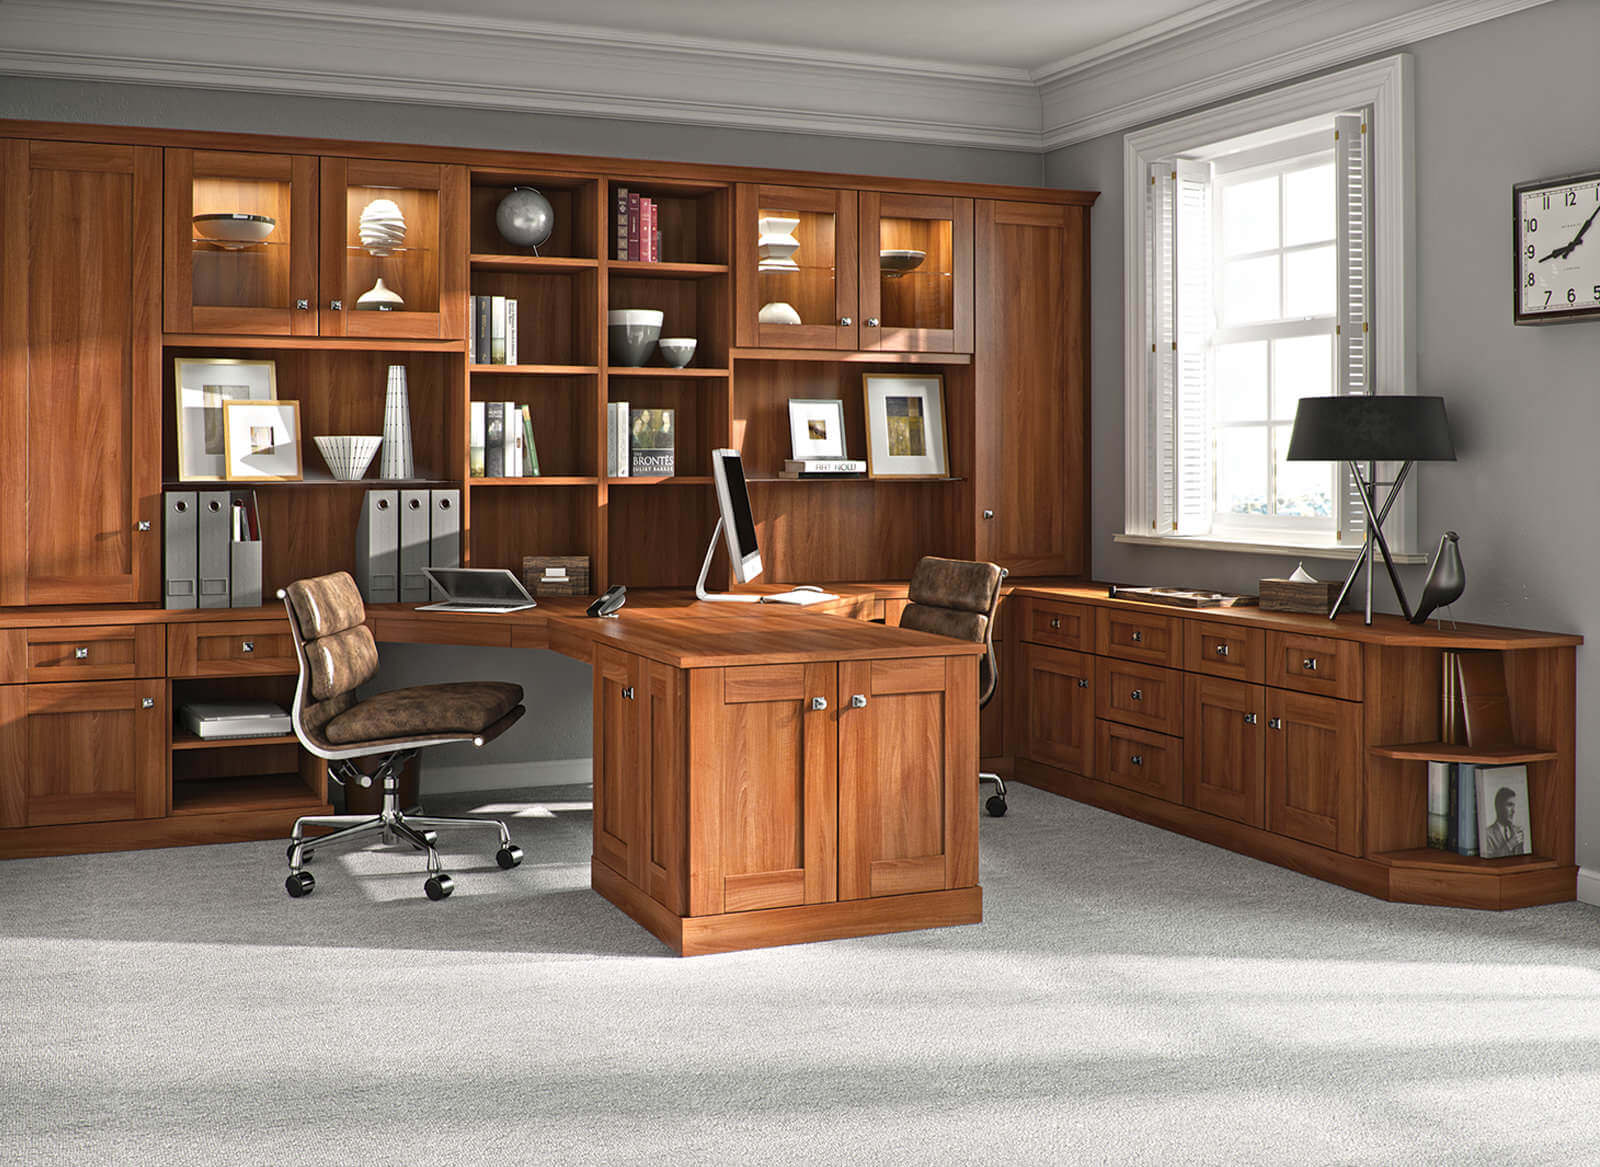 A shaker style angular desk in a walnut coloured home office